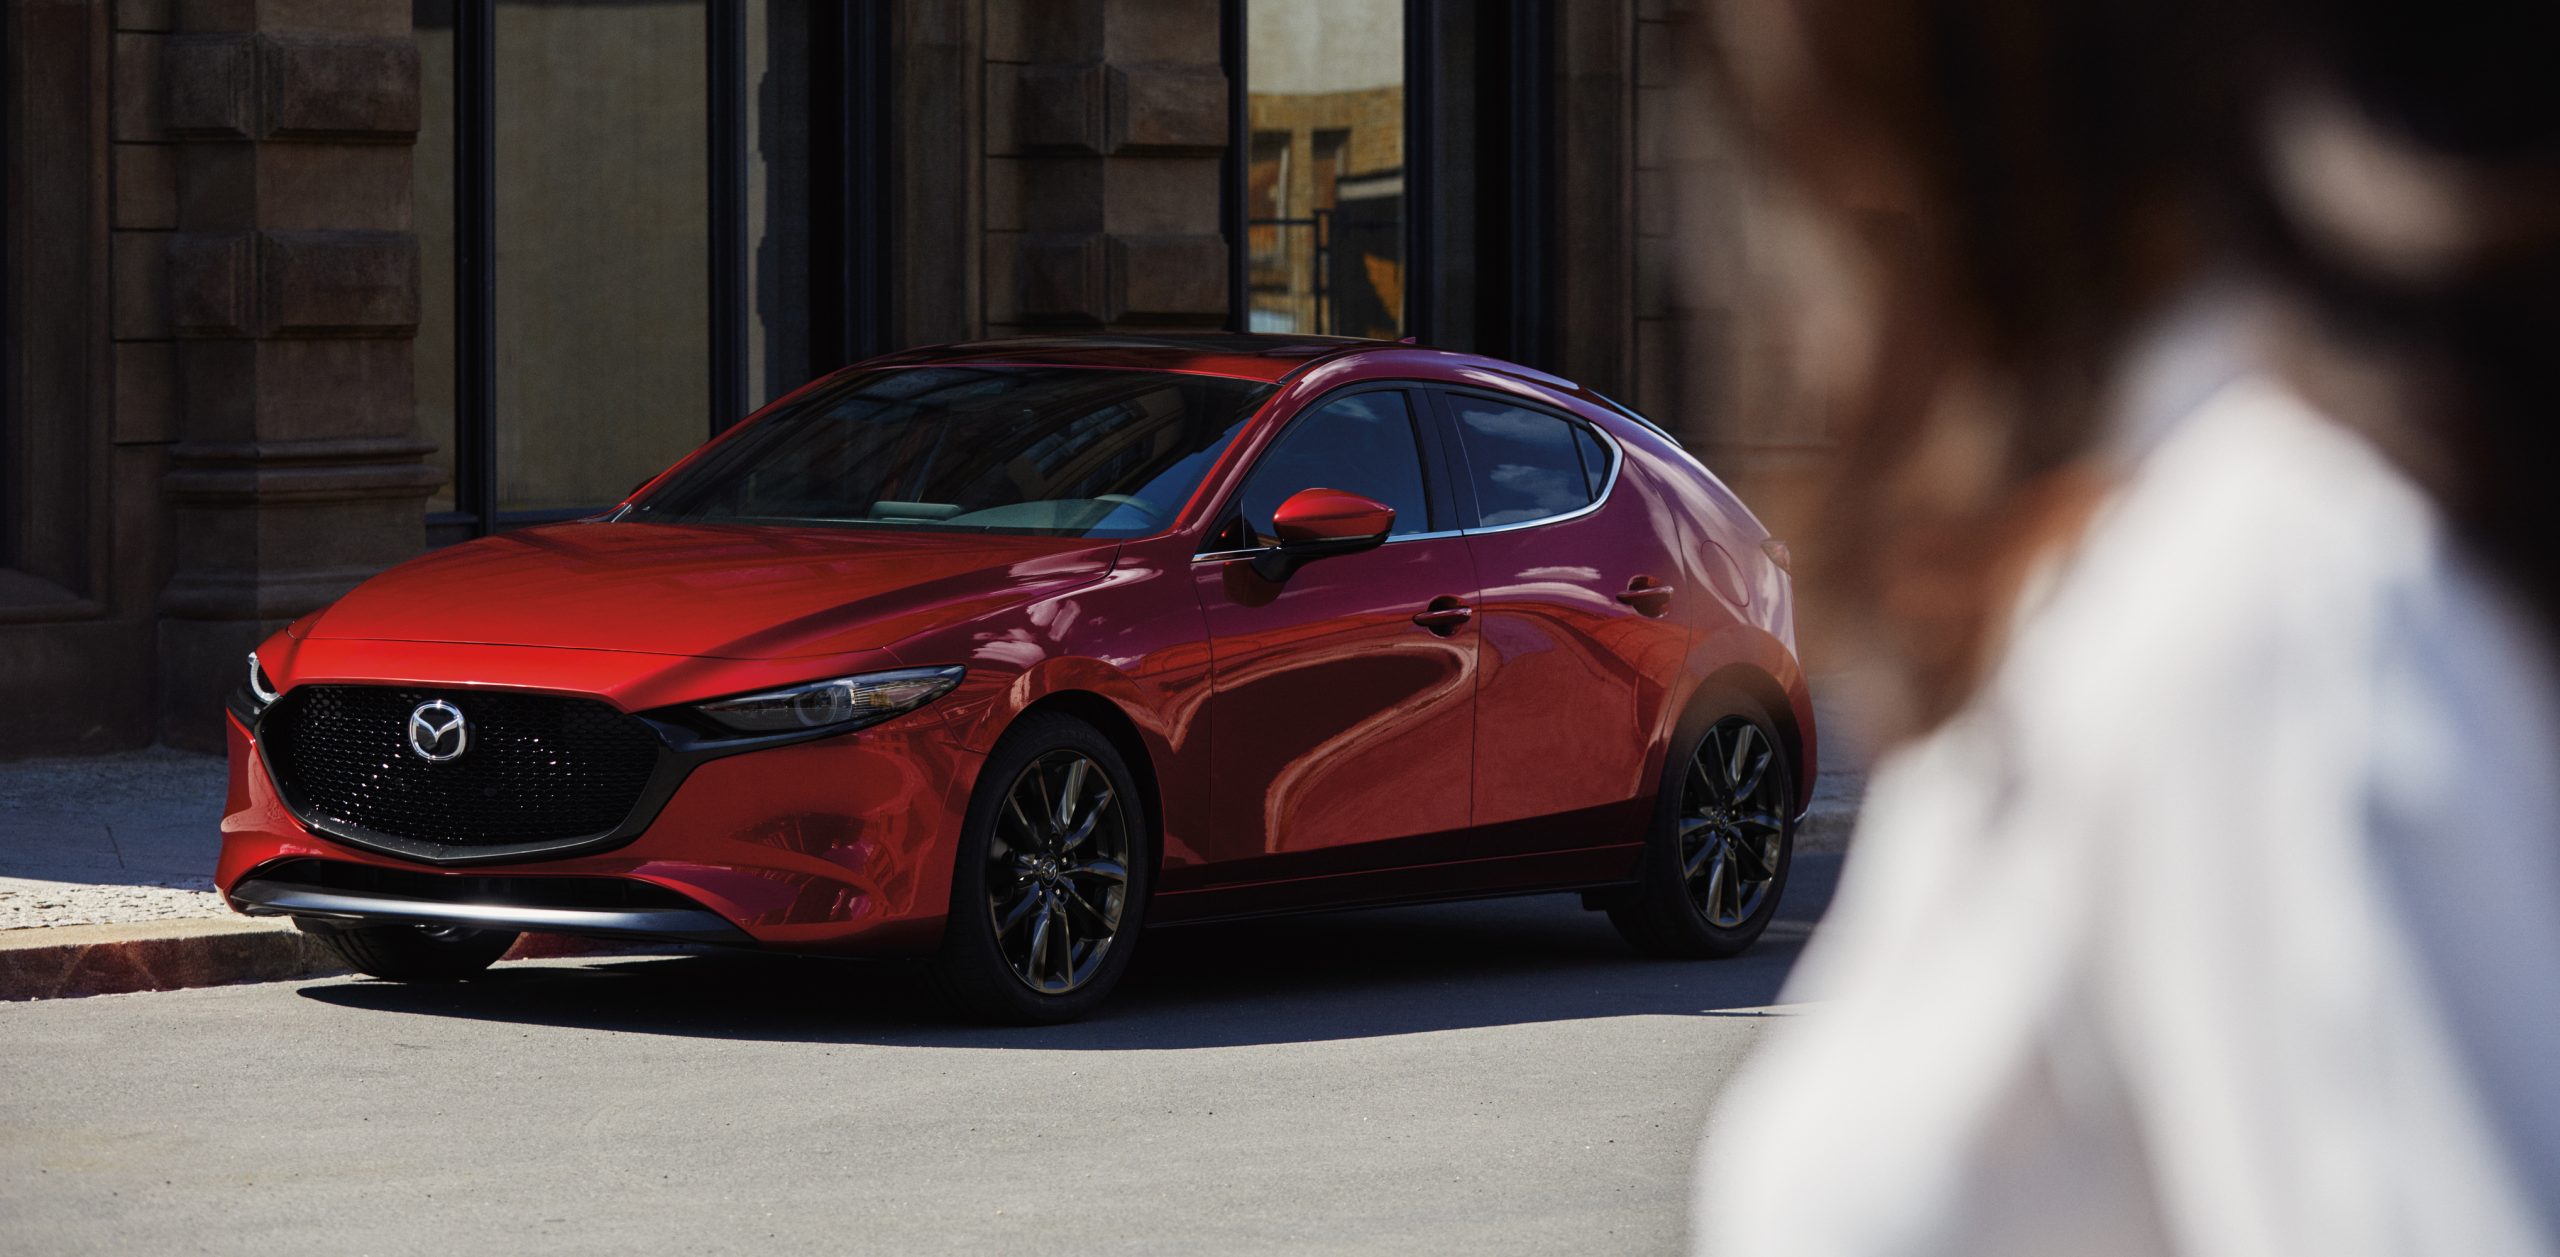 2020 Mazda3 Hatchback Awd One Of The Best Small Cars Finally